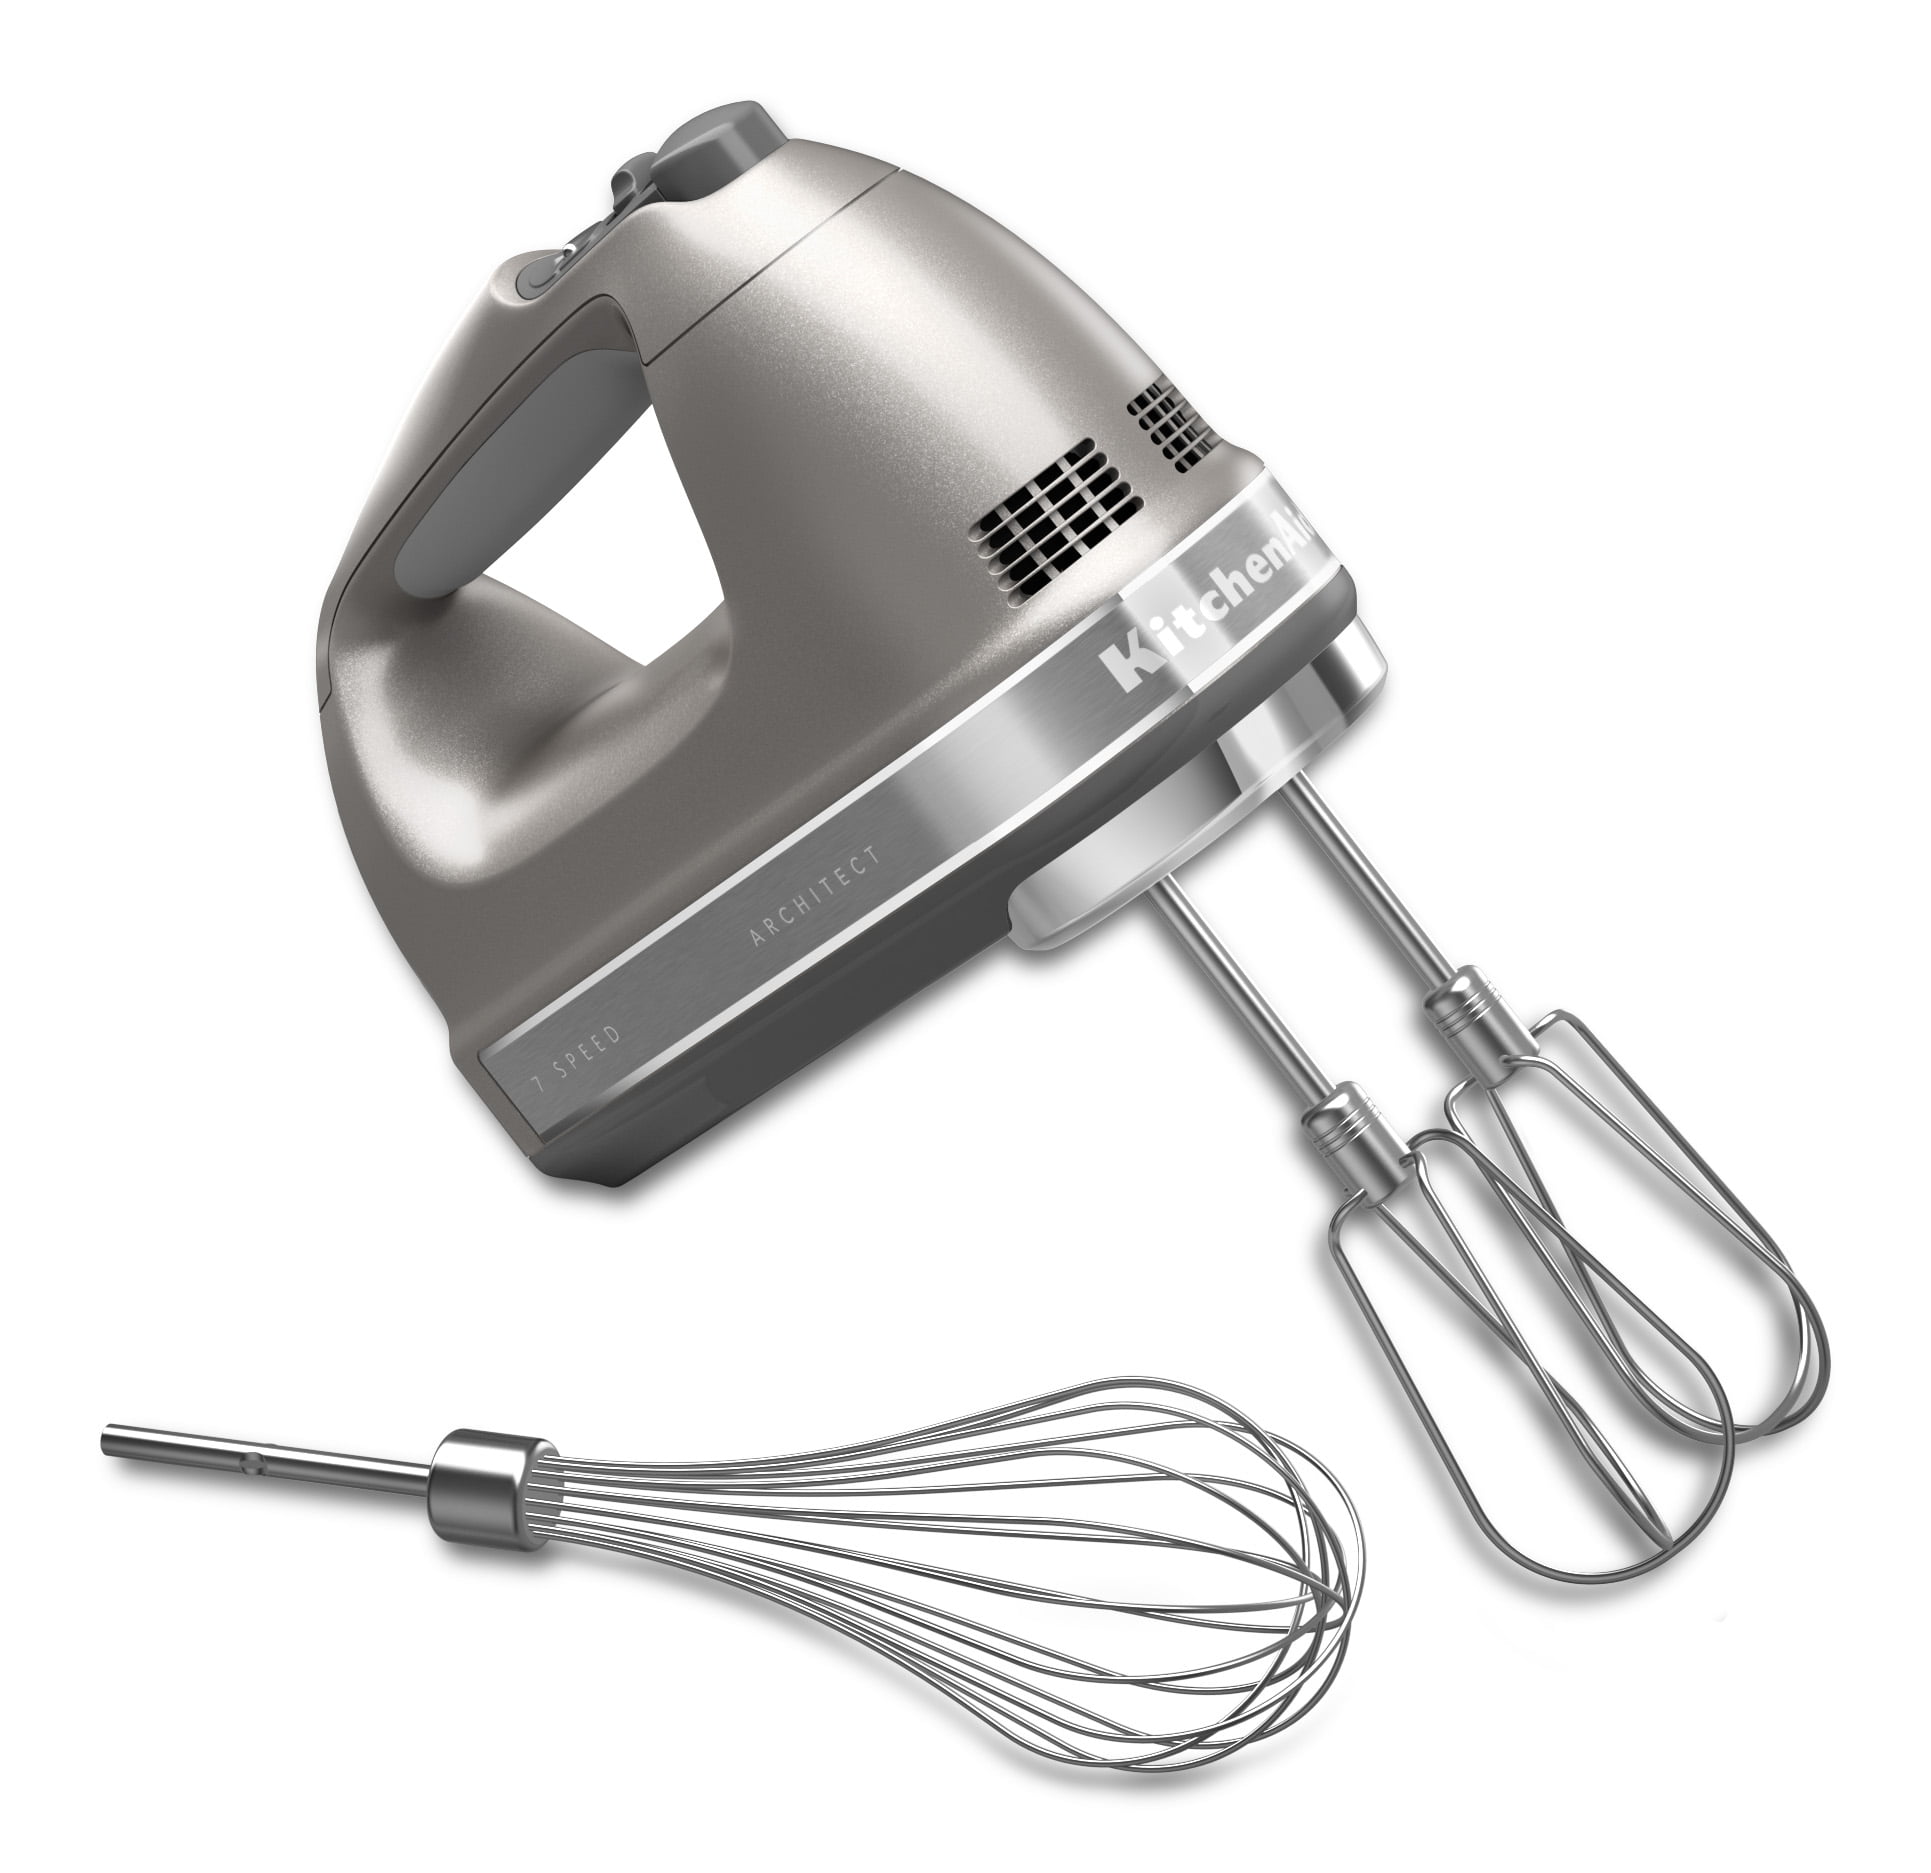 KitchenAid® 7-Speed Hand Mixer with Turbo Beater - Cocoa Silver